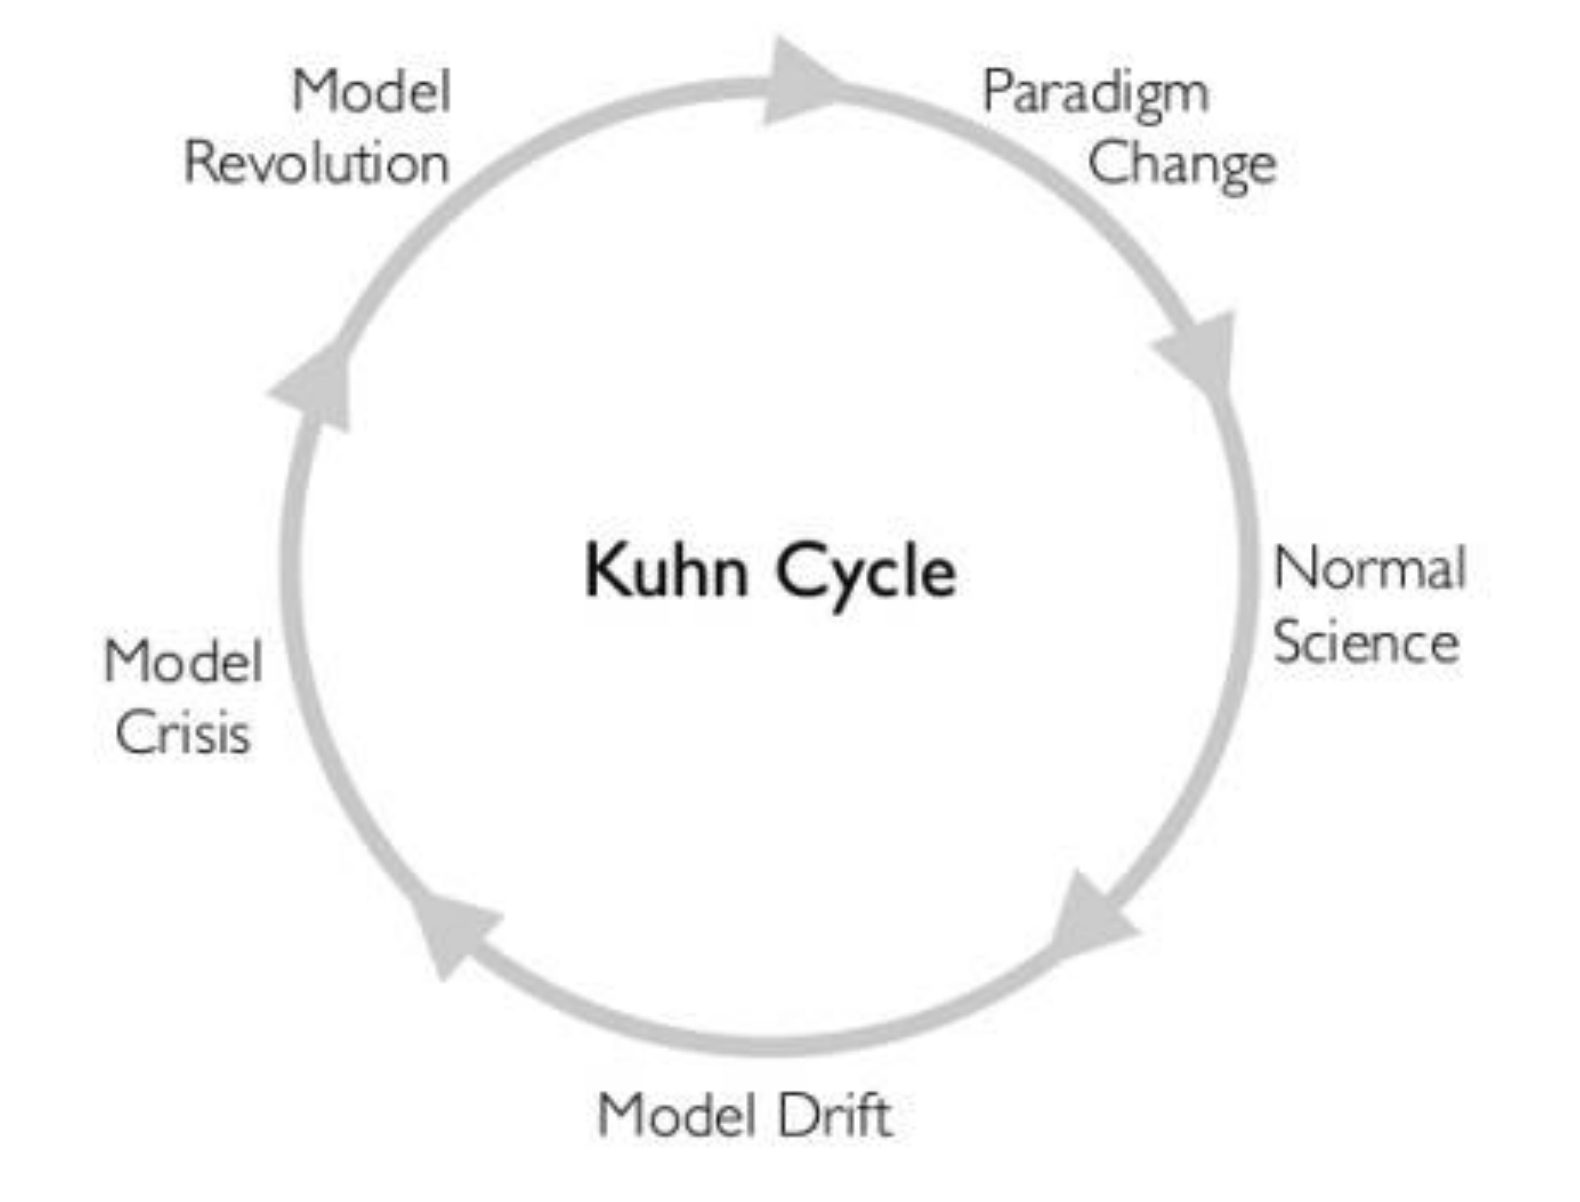 A diagram showing a continuous circular flow between: Normal Science, Model Drift, Model Crisis, Model Resolution, Paradigm Change.